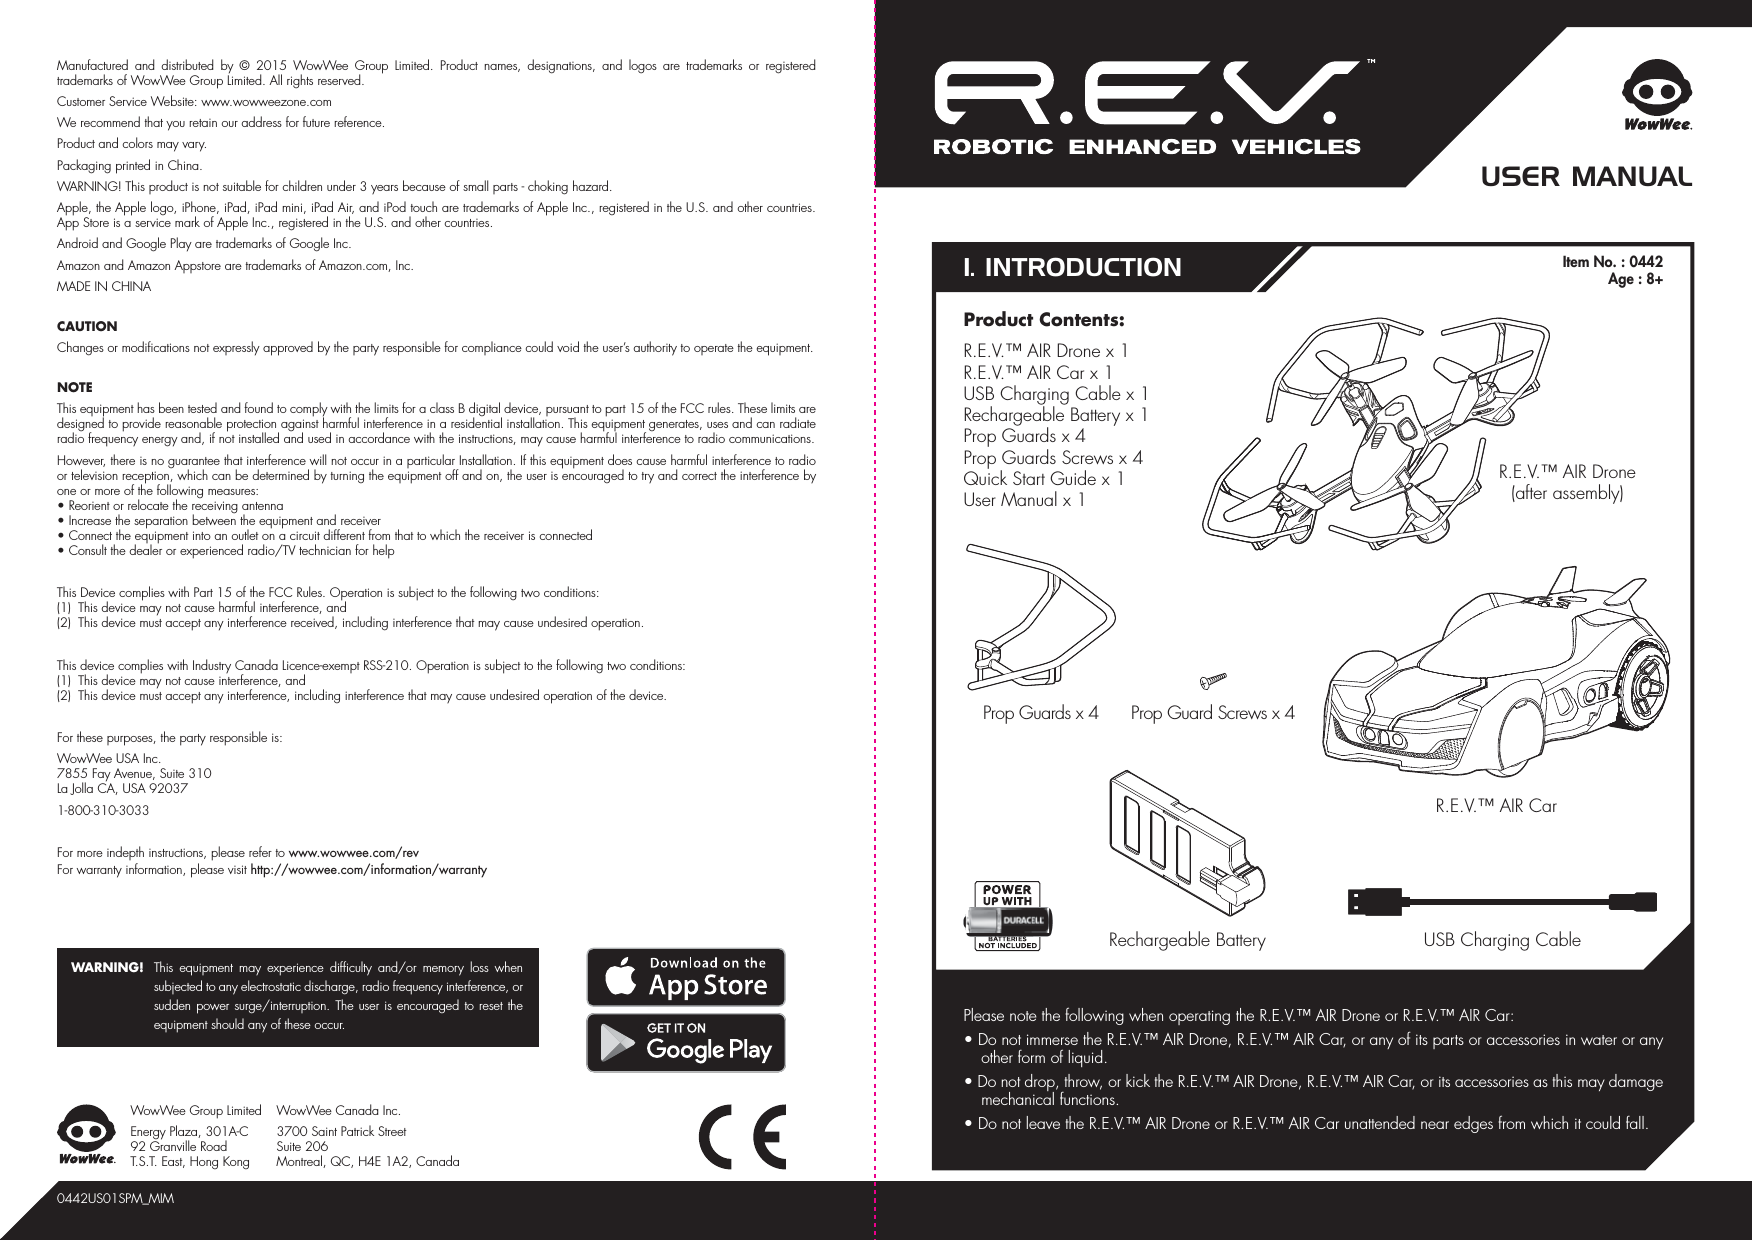 1. INTRODUCTIONUSER MANUALR.E.V.™ AIR Drone(after assembly)Product Contents:R.E.V.™ AIR Drone x 1R.E.V.™ AIR Car x 1USB Charging Cable x 1Rechargeable Battery x 1Prop Guards x 4Prop Guards Screws x 4Quick Start Guide x 1User Manual x 1R.E.V.™ AIR Car0442US01SPM_MIMPlease note the following when operating the R.E.V.™ AIR Drone or R.E.V.™ AIR Car:• Do not immerse the R.E.V.™ AIR Drone, R.E.V.™ AIR Car, or any of its parts or accessories in water or any other form of liquid.• Do not drop, throw, or kick the R.E.V.™ AIR Drone, R.E.V.™ AIR Car, or its accessories as this may damage mechanical functions.• Do not leave the R.E.V.™ AIR Drone or R.E.V.™ AIR Car unattended near edges from which it could fall.USB Charging CableRechargeable BatteryProp Guard Screws x 4Manufactured and distributed by © 2015 WowWee Group Limited. Product names, designations, and logos are trademarks or registered trademarks of WowWee Group Limited. All rights reserved.Customer Service Website: www.wowweezone.comWe recommend that you retain our address for future reference.Product and colors may vary.Packaging printed in China.WARNING! This product is not suitable for children under 3 years because of small parts - choking hazard.Apple, the Apple logo, iPhone, iPad, iPad mini, iPad Air, and iPod touch are trademarks of Apple Inc., registered in the U.S. and other countries. App Store is a service mark of Apple Inc., registered in the U.S. and other countries.Android and Google Play are trademarks of Google Inc.Amazon and Amazon Appstore are trademarks of Amazon.com, Inc.MADE IN CHINACAUTIONChanges or modifications not expressly approved by the party responsible for compliance could void the user’s authority to operate the equipment.NOTEThis equipment has been tested and found to comply with the limits for a class B digital device, pursuant to part 15 of the FCC rules. These limits are designed to provide reasonable protection against harmful interference in a residential installation. This equipment generates, uses and can radiate radio frequency energy and, if not installed and used in accordance with the instructions, may cause harmful interference to radio communications.However, there is no guarantee that interference will not occur in a particular Installation. If this equipment does cause harmful interference to radio or television reception, which can be determined by turning the equipment off and on, the user is encouraged to try and correct the interference by one or more of the following measures:• Reorient or relocate the receiving antenna• Increase the separation between the equipment and receiver• Connect the equipment into an outlet on a circuit different from that to which the receiver is connected• Consult the dealer or experienced radio/TV technician for helpThis Device complies with Part 15 of the FCC Rules. Operation is subject to the following two conditions:(1)  This device may not cause harmful interference, and(2)  This device must accept any interference received, including interference that may cause undesired operation.This device complies with Industry Canada Licence-exempt RSS-210. Operation is subject to the following two conditions:(1)  This device may not cause interference, and(2)  This device must accept any interference, including interference that may cause undesired operation of the device.For these purposes, the party responsible is:WowWee USA Inc.7855 Fay Avenue, Suite 310 La Jolla CA, USA 920371-800-310-3033For more indepth instructions, please refer to www.wowwee.com/revFor warranty information, please visit http://wowwee.com/information/warrantyWARNING!  This equipment may experience difficulty and/or memory loss when subjected to any electrostatic discharge, radio frequency interference, or sudden power surge/interruption. The user is encouraged to reset the equipment should any of these occur.WowWee Group LimitedEnergy Plaza, 301A-C92 Granville RoadT.S.T. East, Hong KongWowWee Canada Inc.3700 Saint Patrick Street Suite 206 Montreal, QC, H4E 1A2, CanadaProp Guards x 4Item No. : 0442Age : 8+